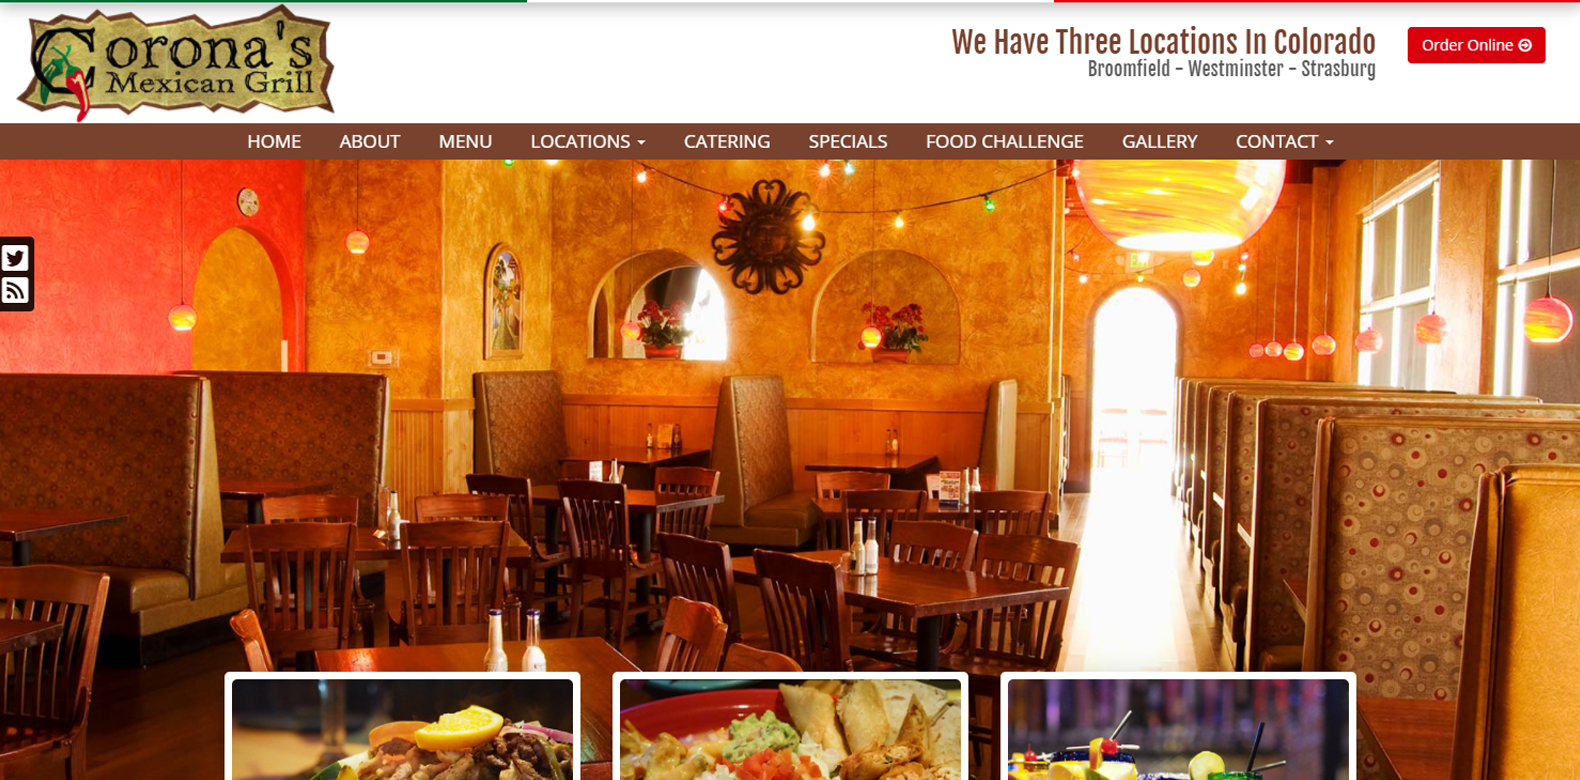 
New Website Launch: Corona's Mexican Grill